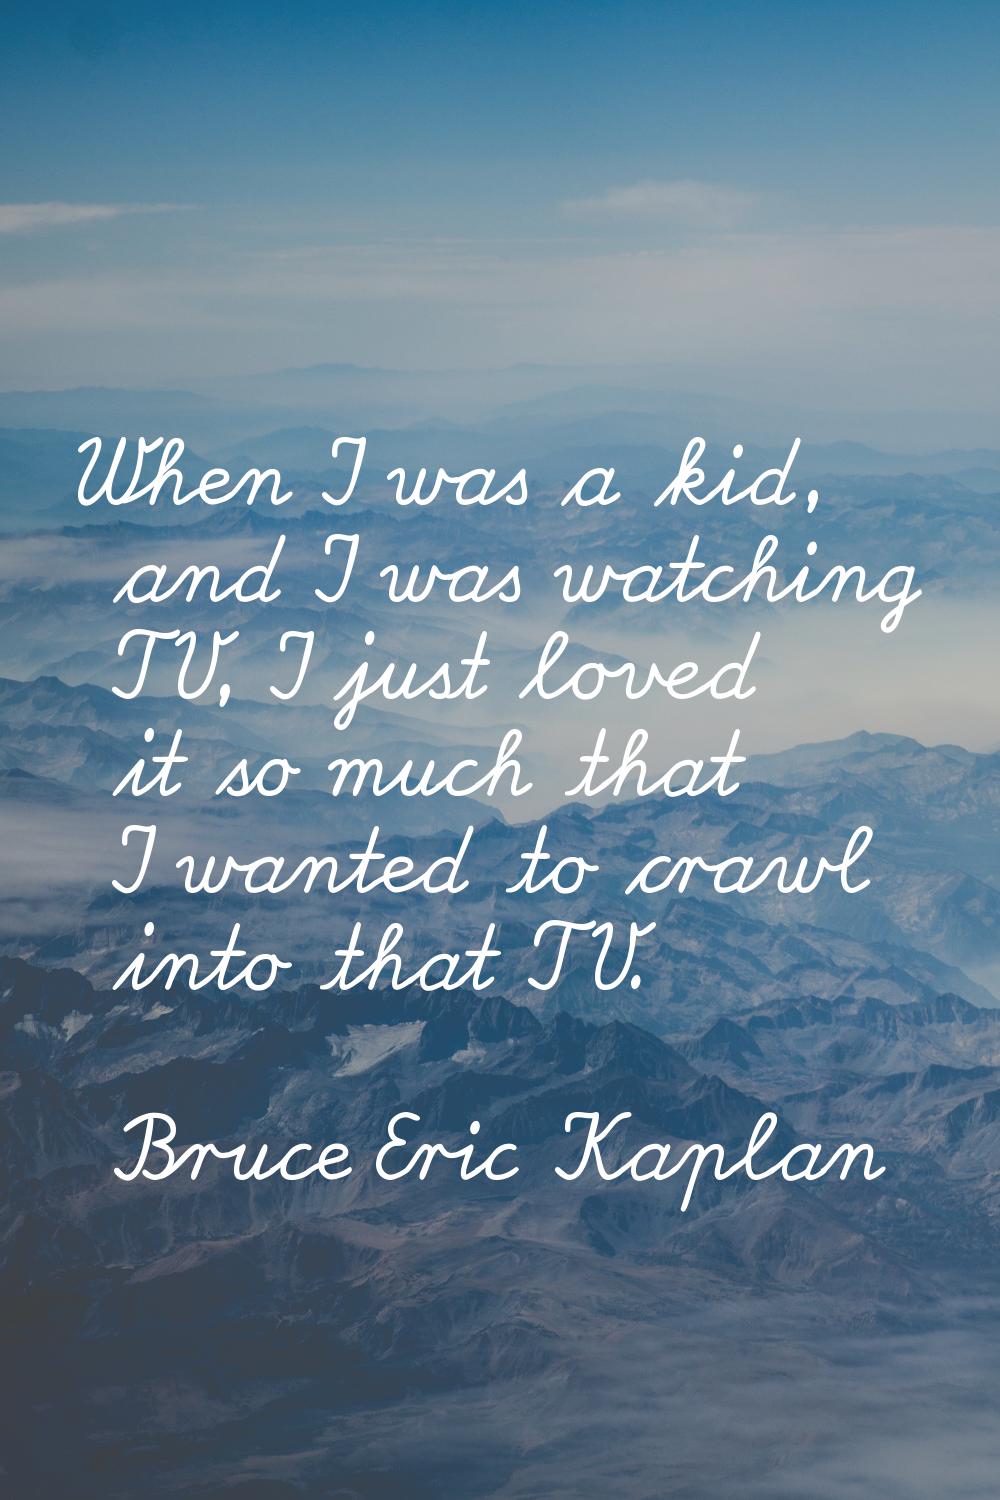 When I was a kid, and I was watching TV, I just loved it so much that I wanted to crawl into that T